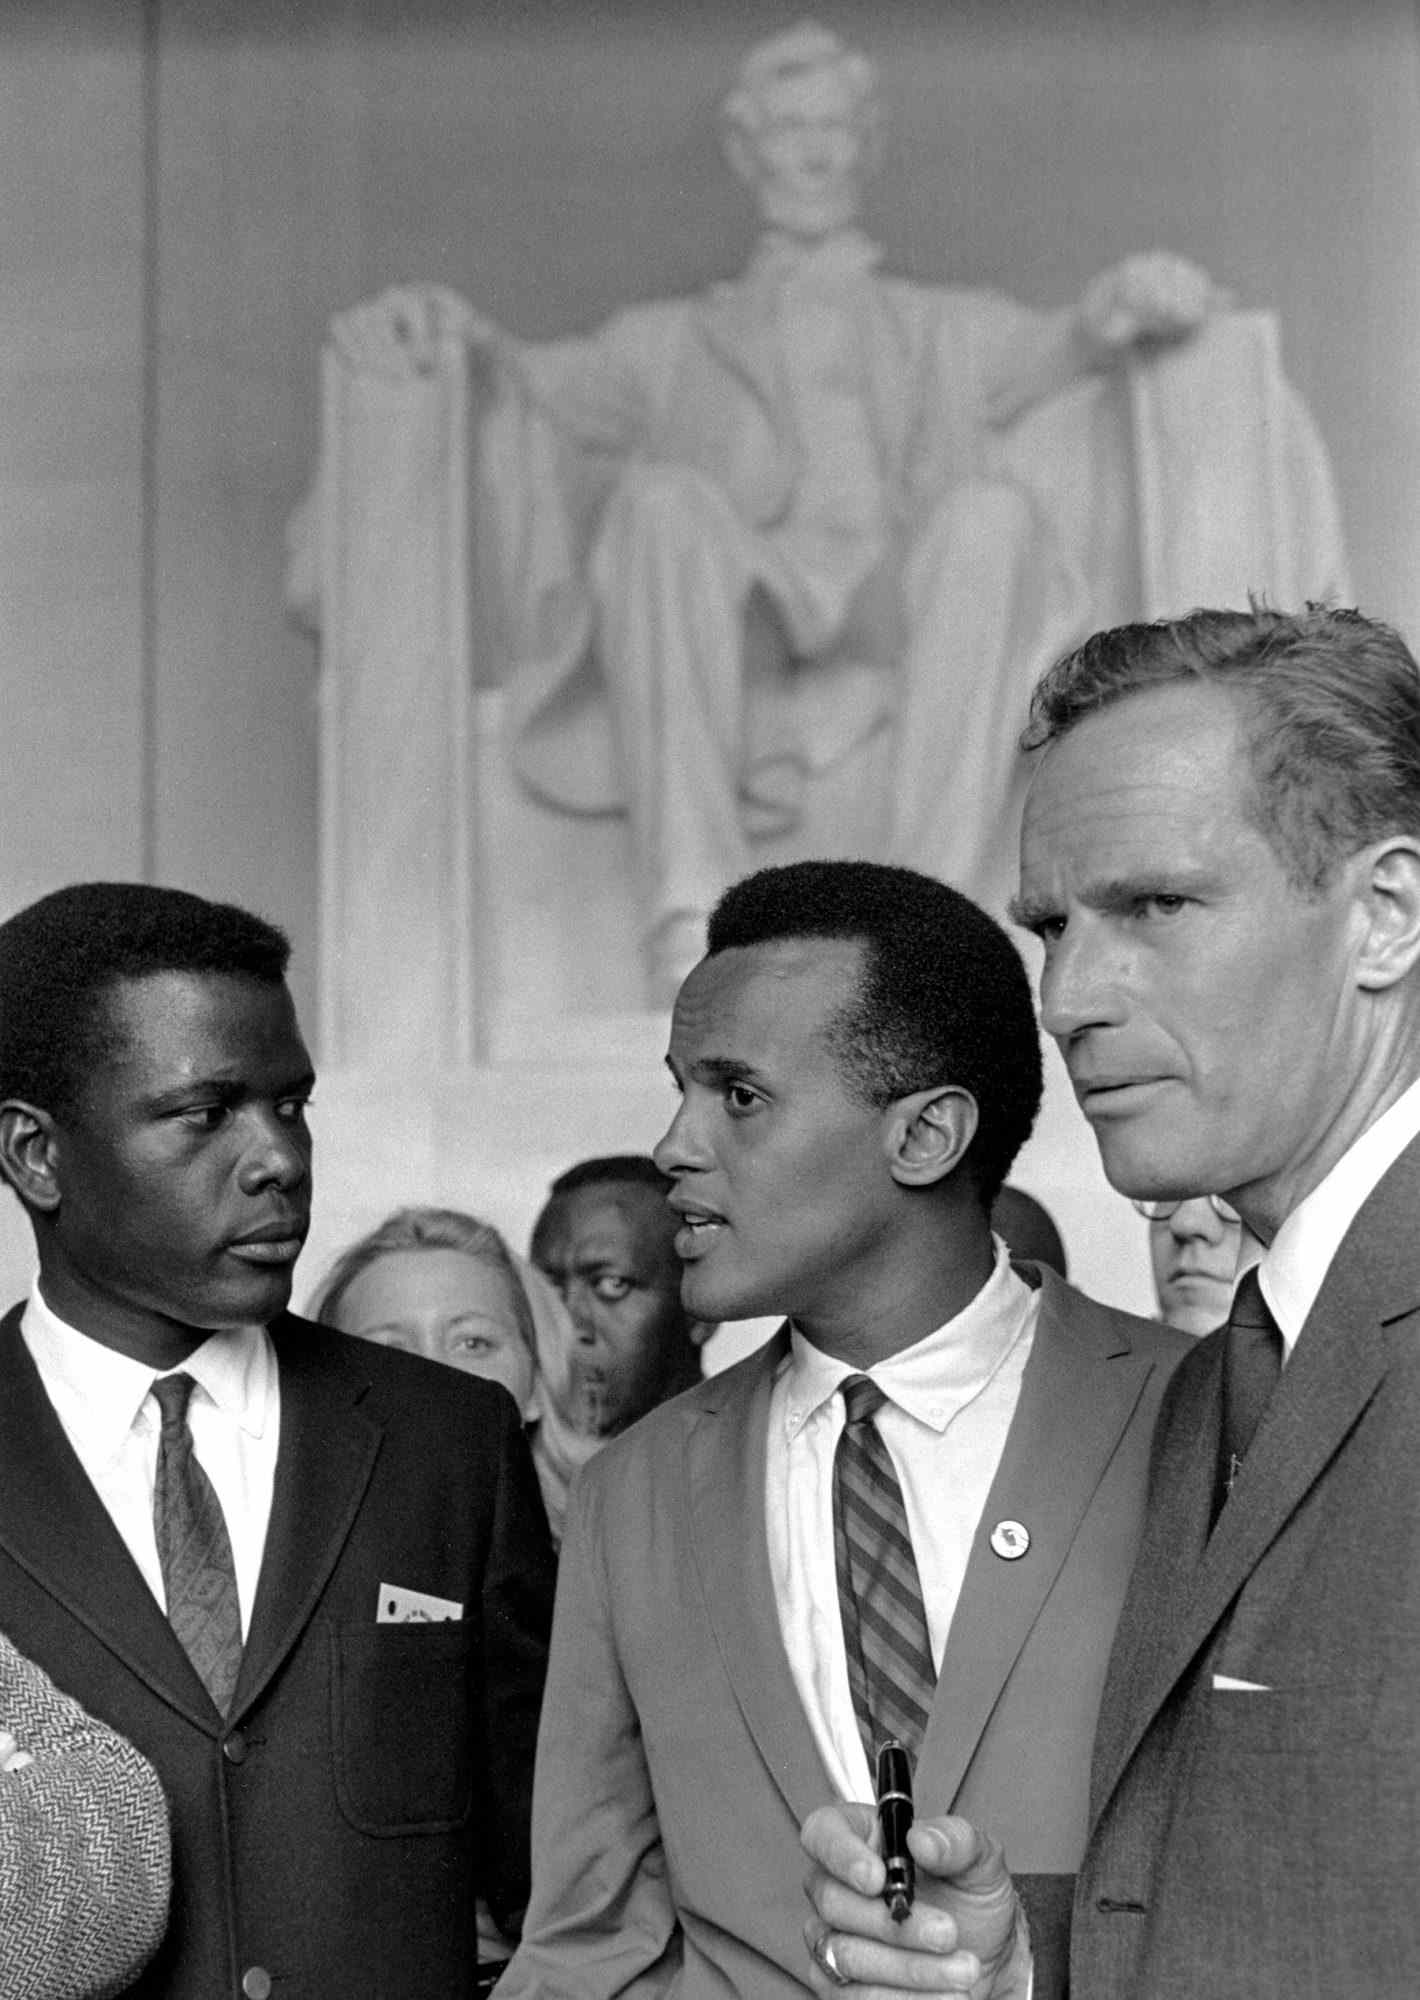 Harry Belafonte With Sidney Poitier and&nbsp;Charleton Heston at the Lincoln Memorial During the March on Washington for Jobs and Freedom&nbsp;on August 28, 1963